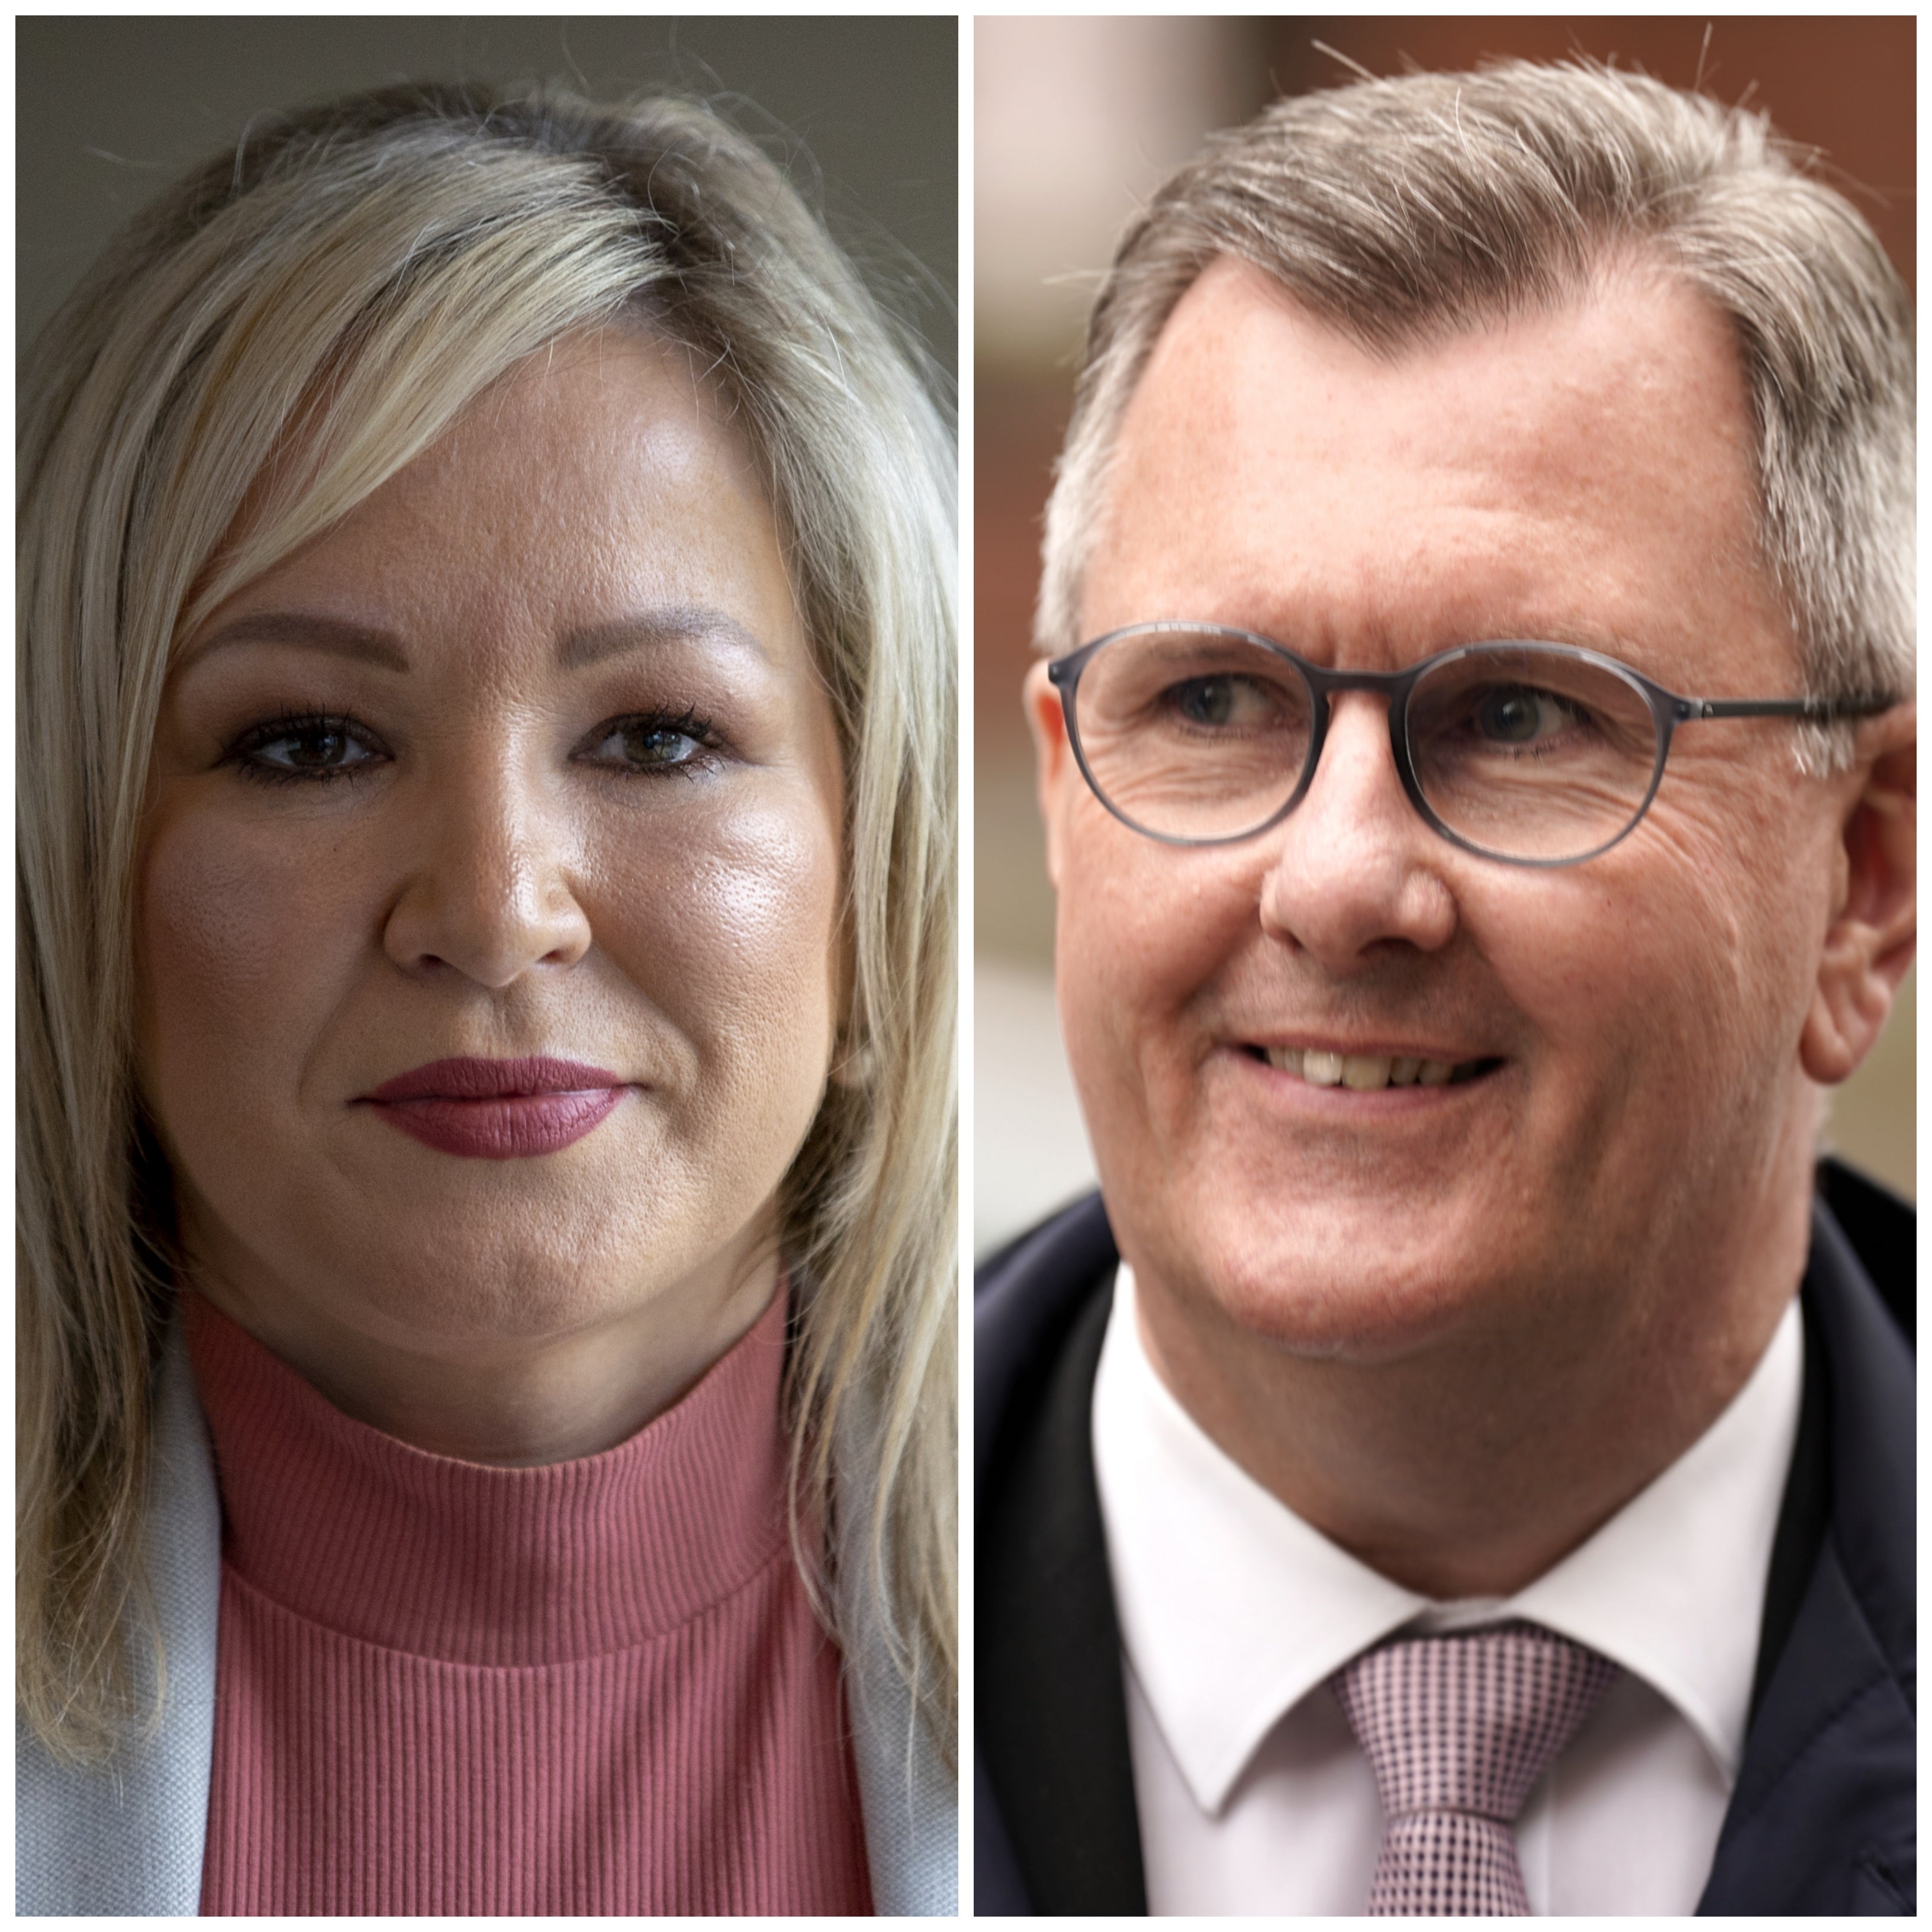 Sinn Fein vice president Michelle O’Neill and DUP leader Sir Jeffrey Donaldson are both hoping to lead their parties to victory in the Stormont Assembly election (PA)